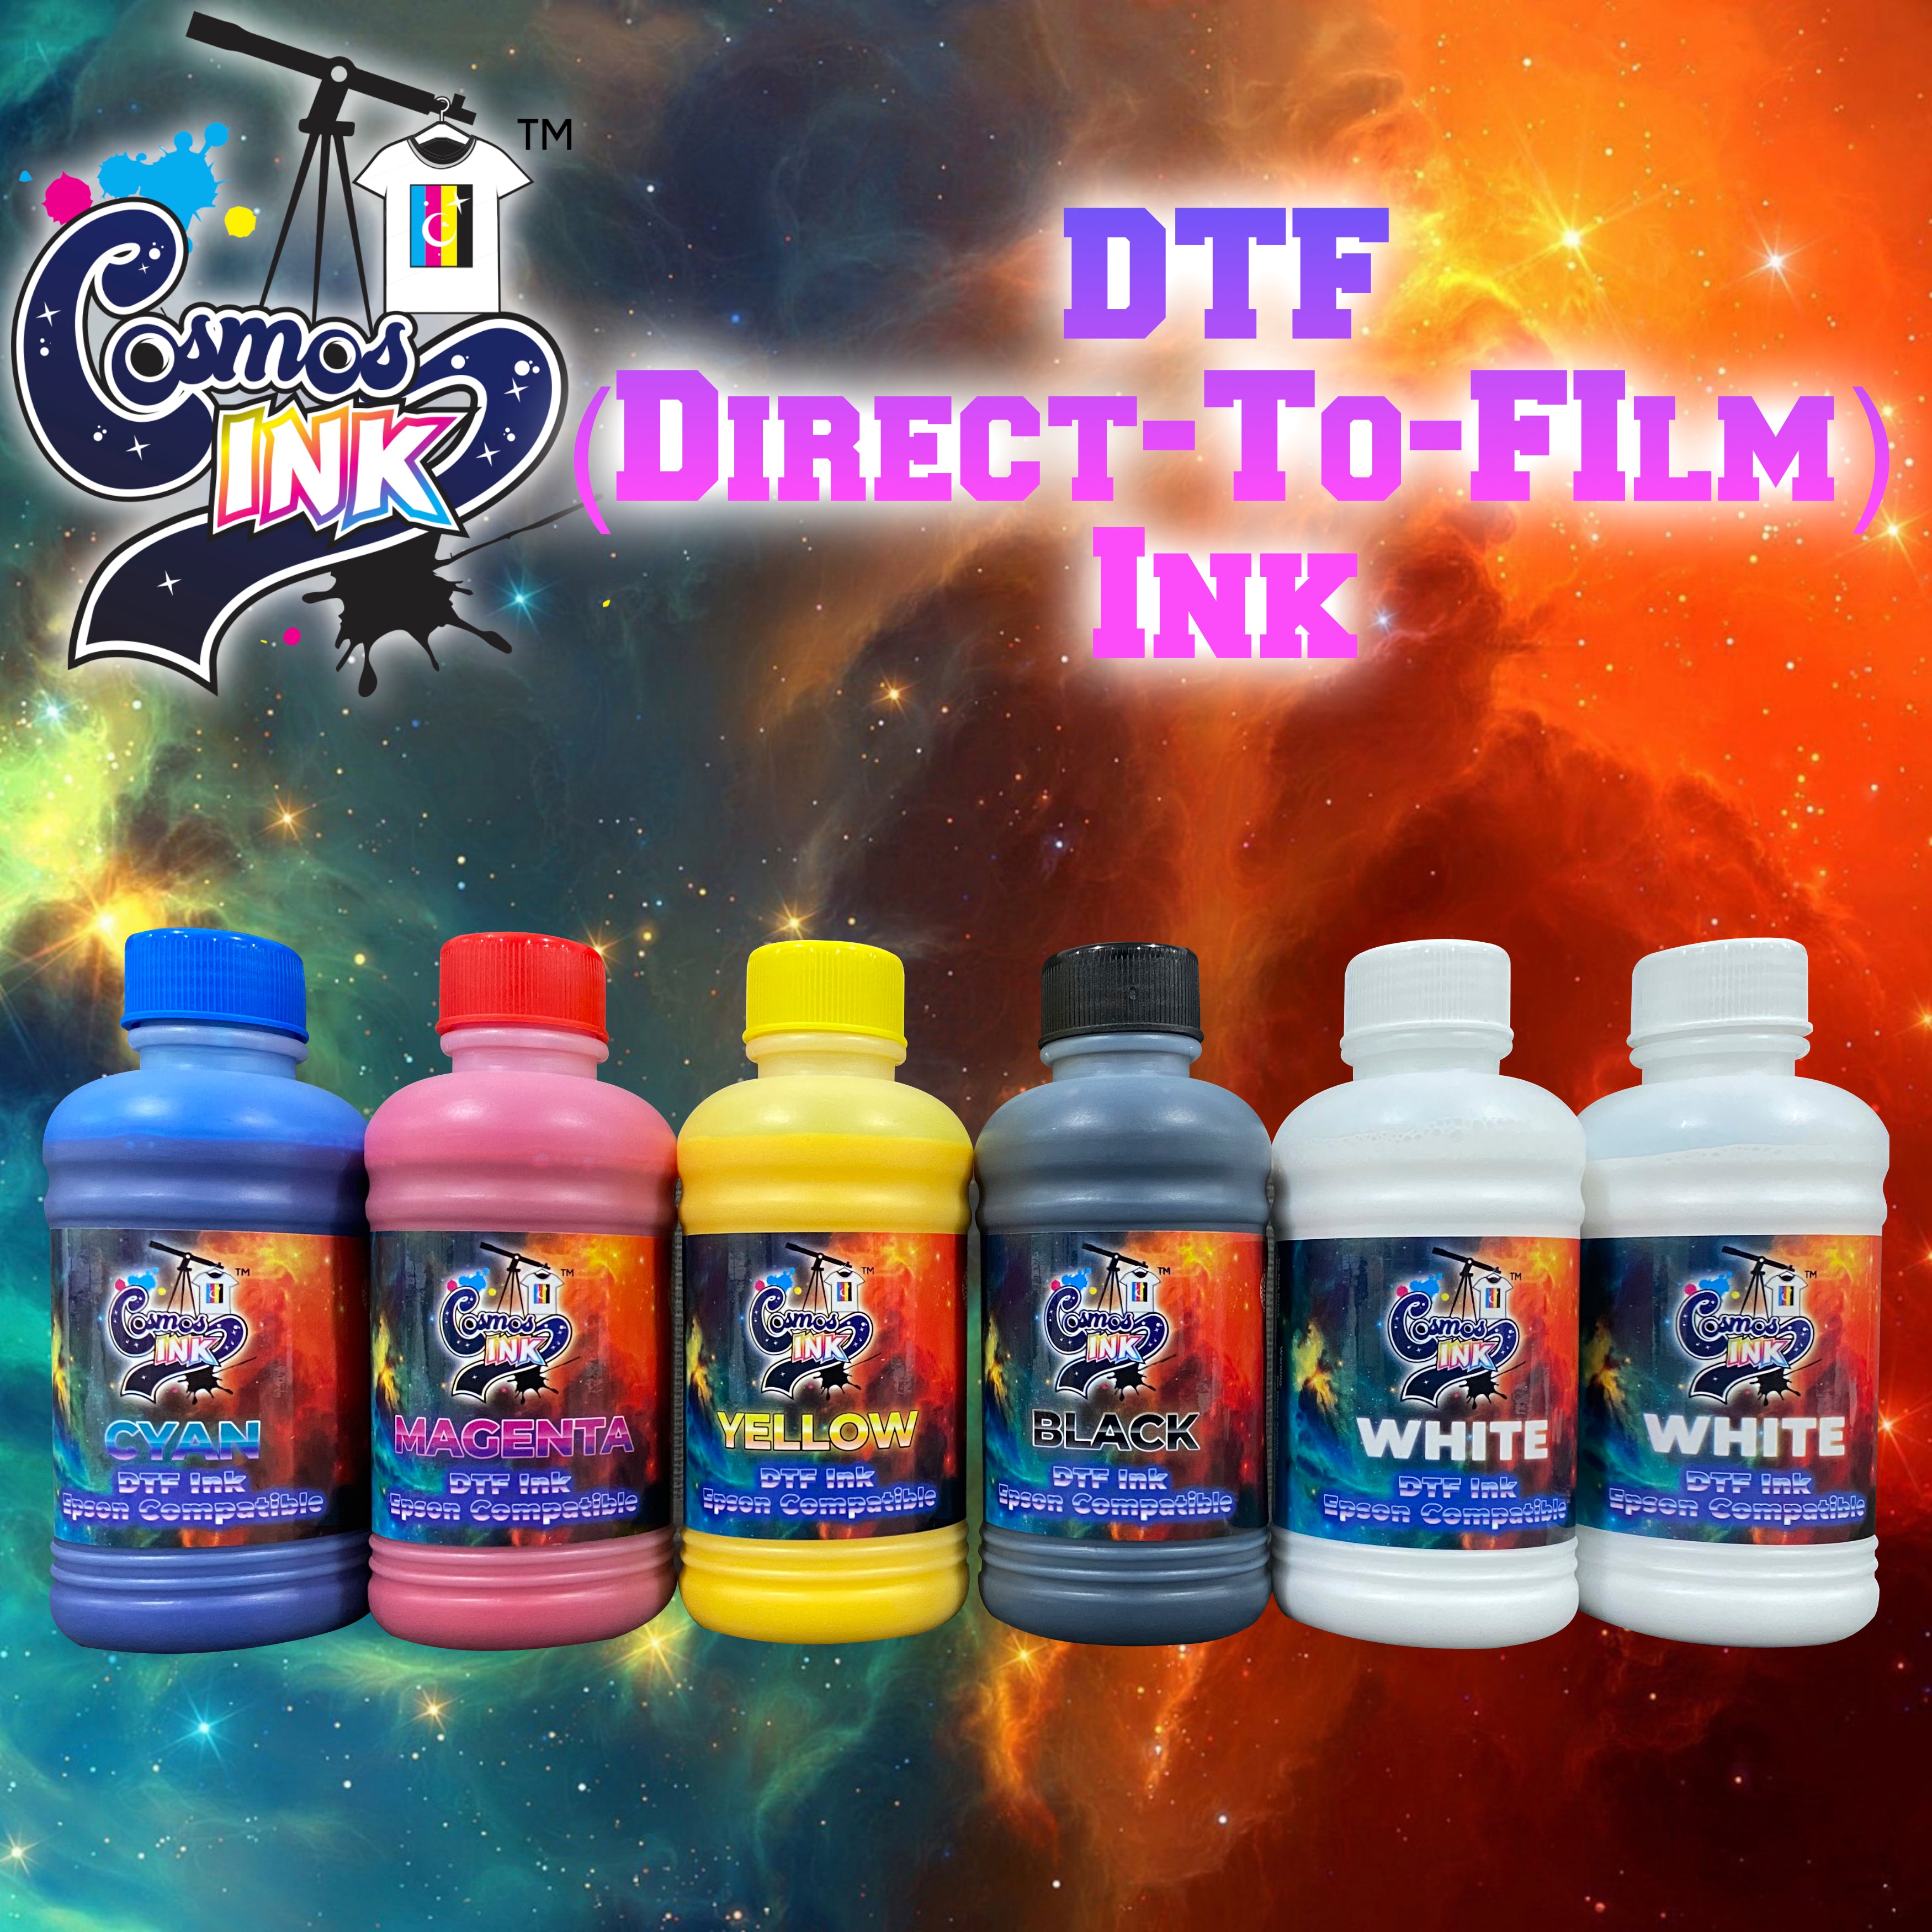 DTF (Direct to Film) Ink for Epson Printers